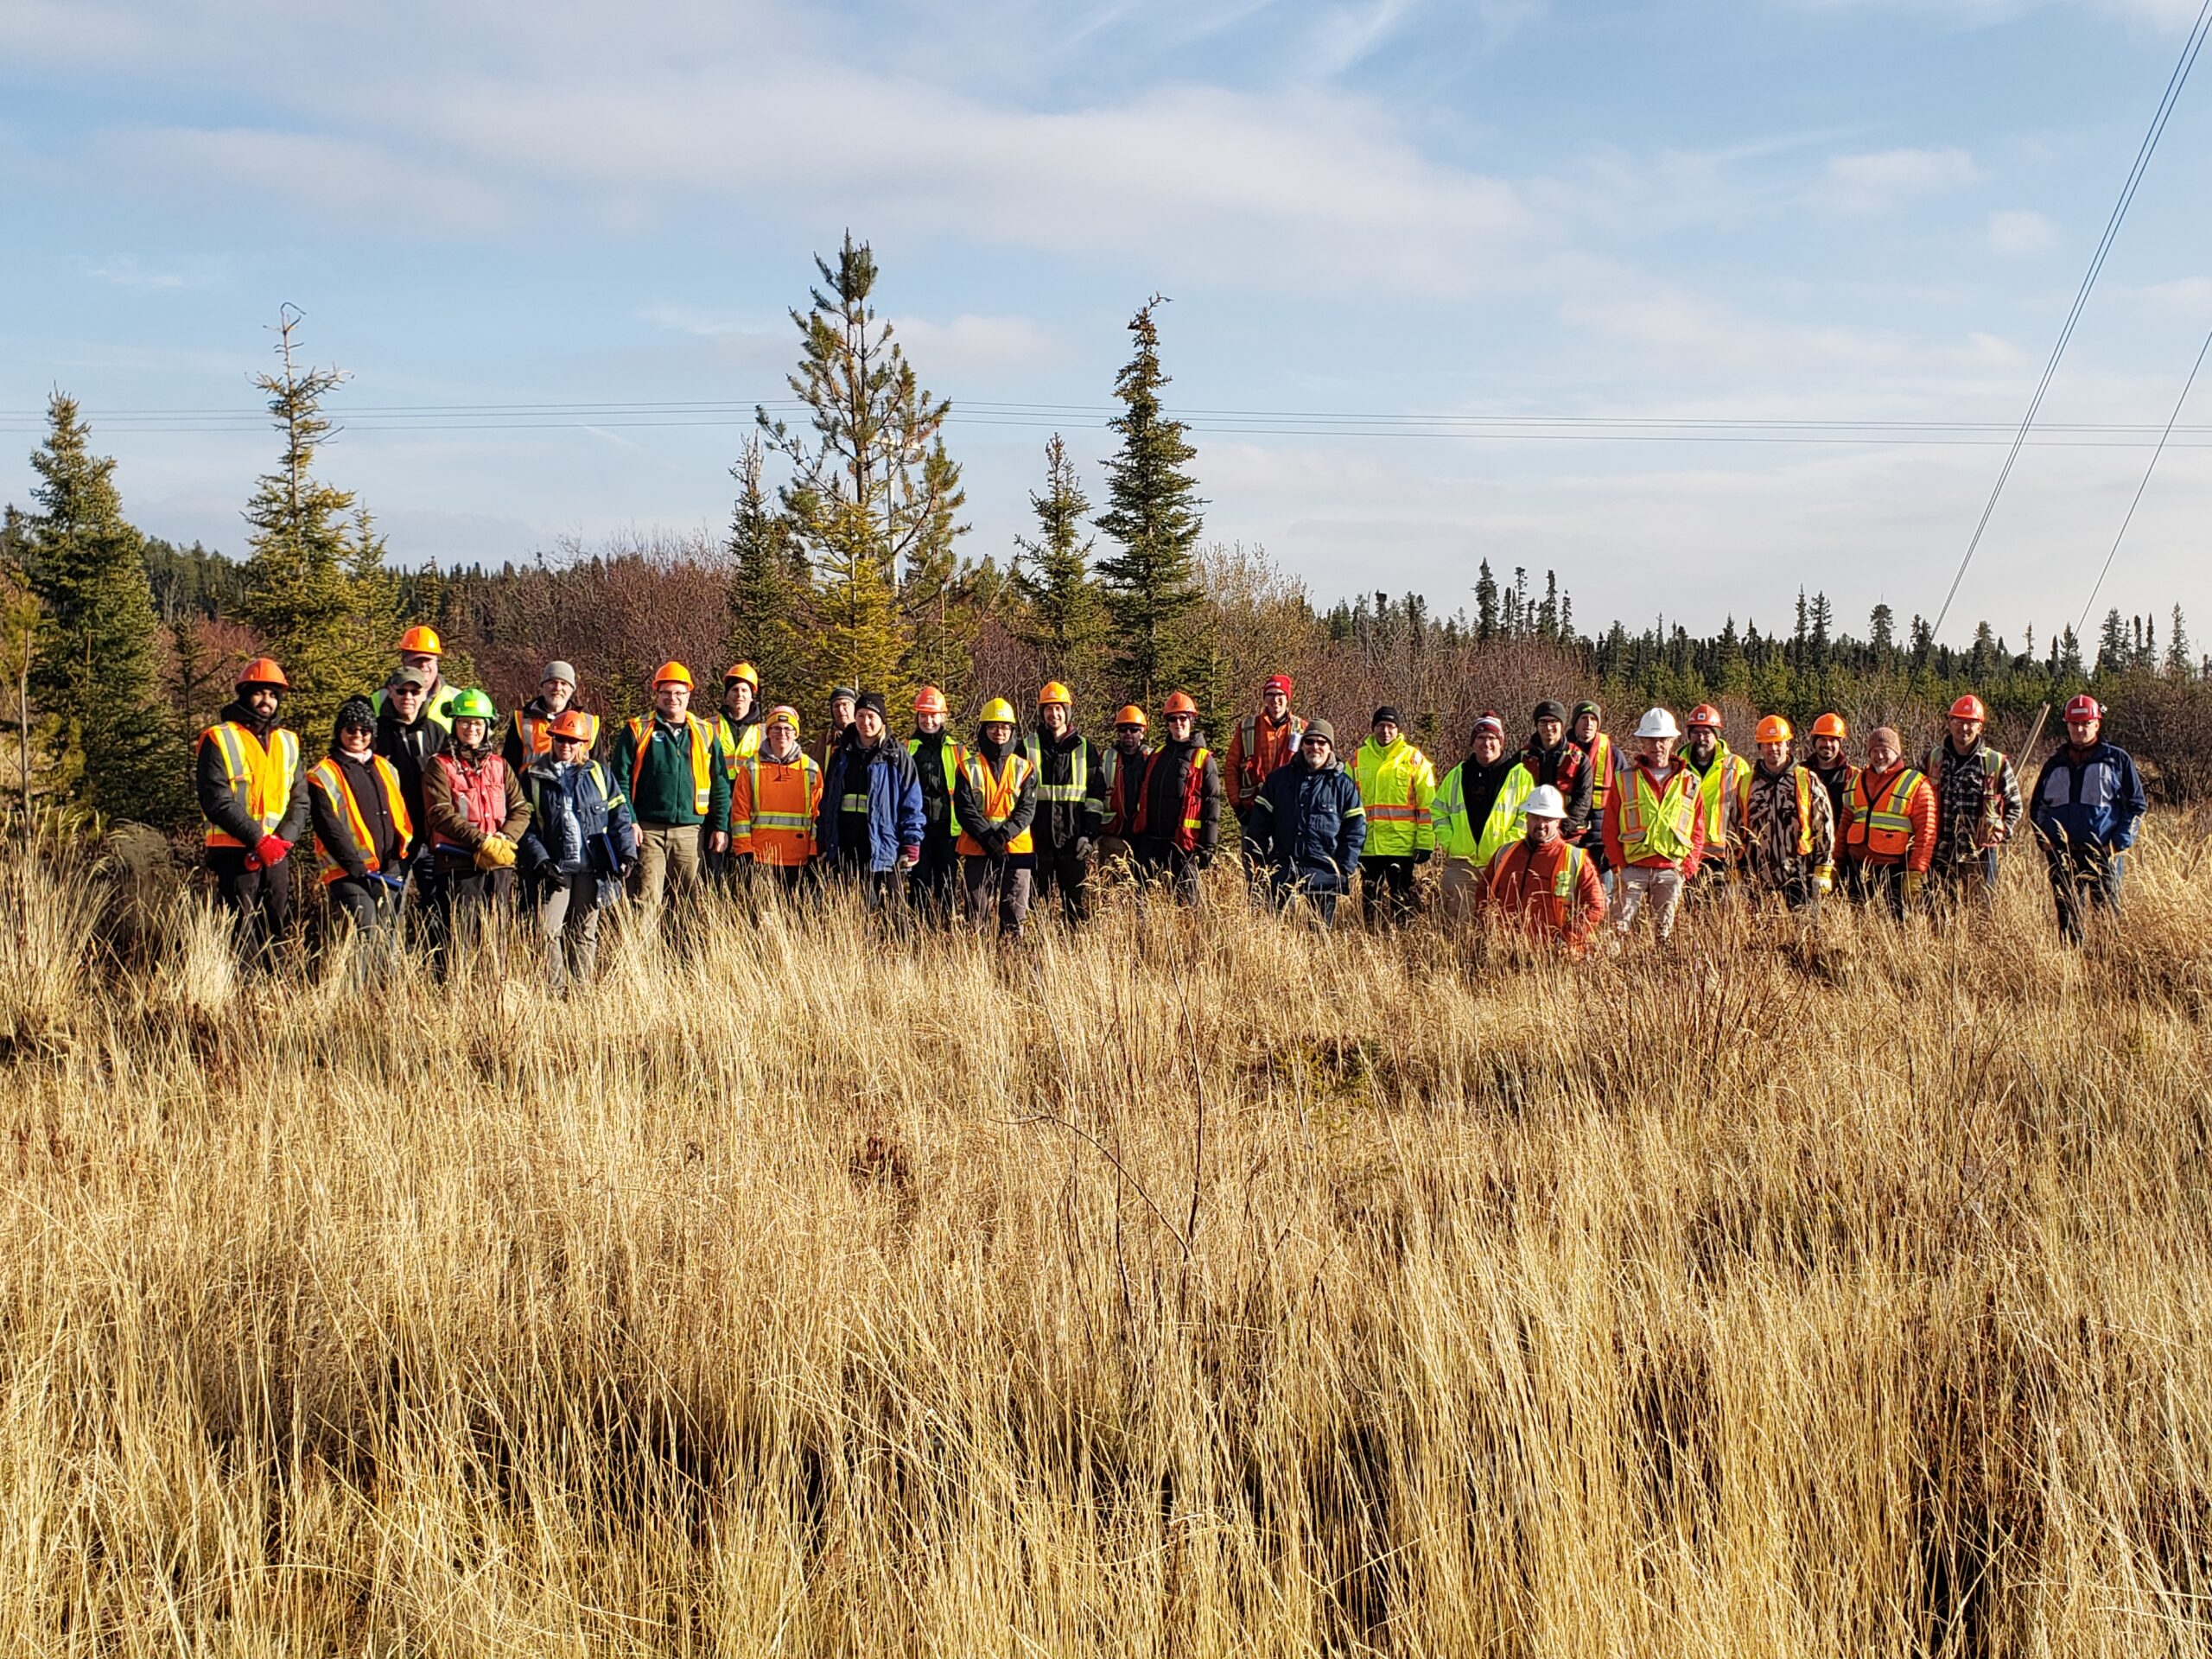 large group of people in hi-vis and helmets standing in an area with tall grass and trees in the background